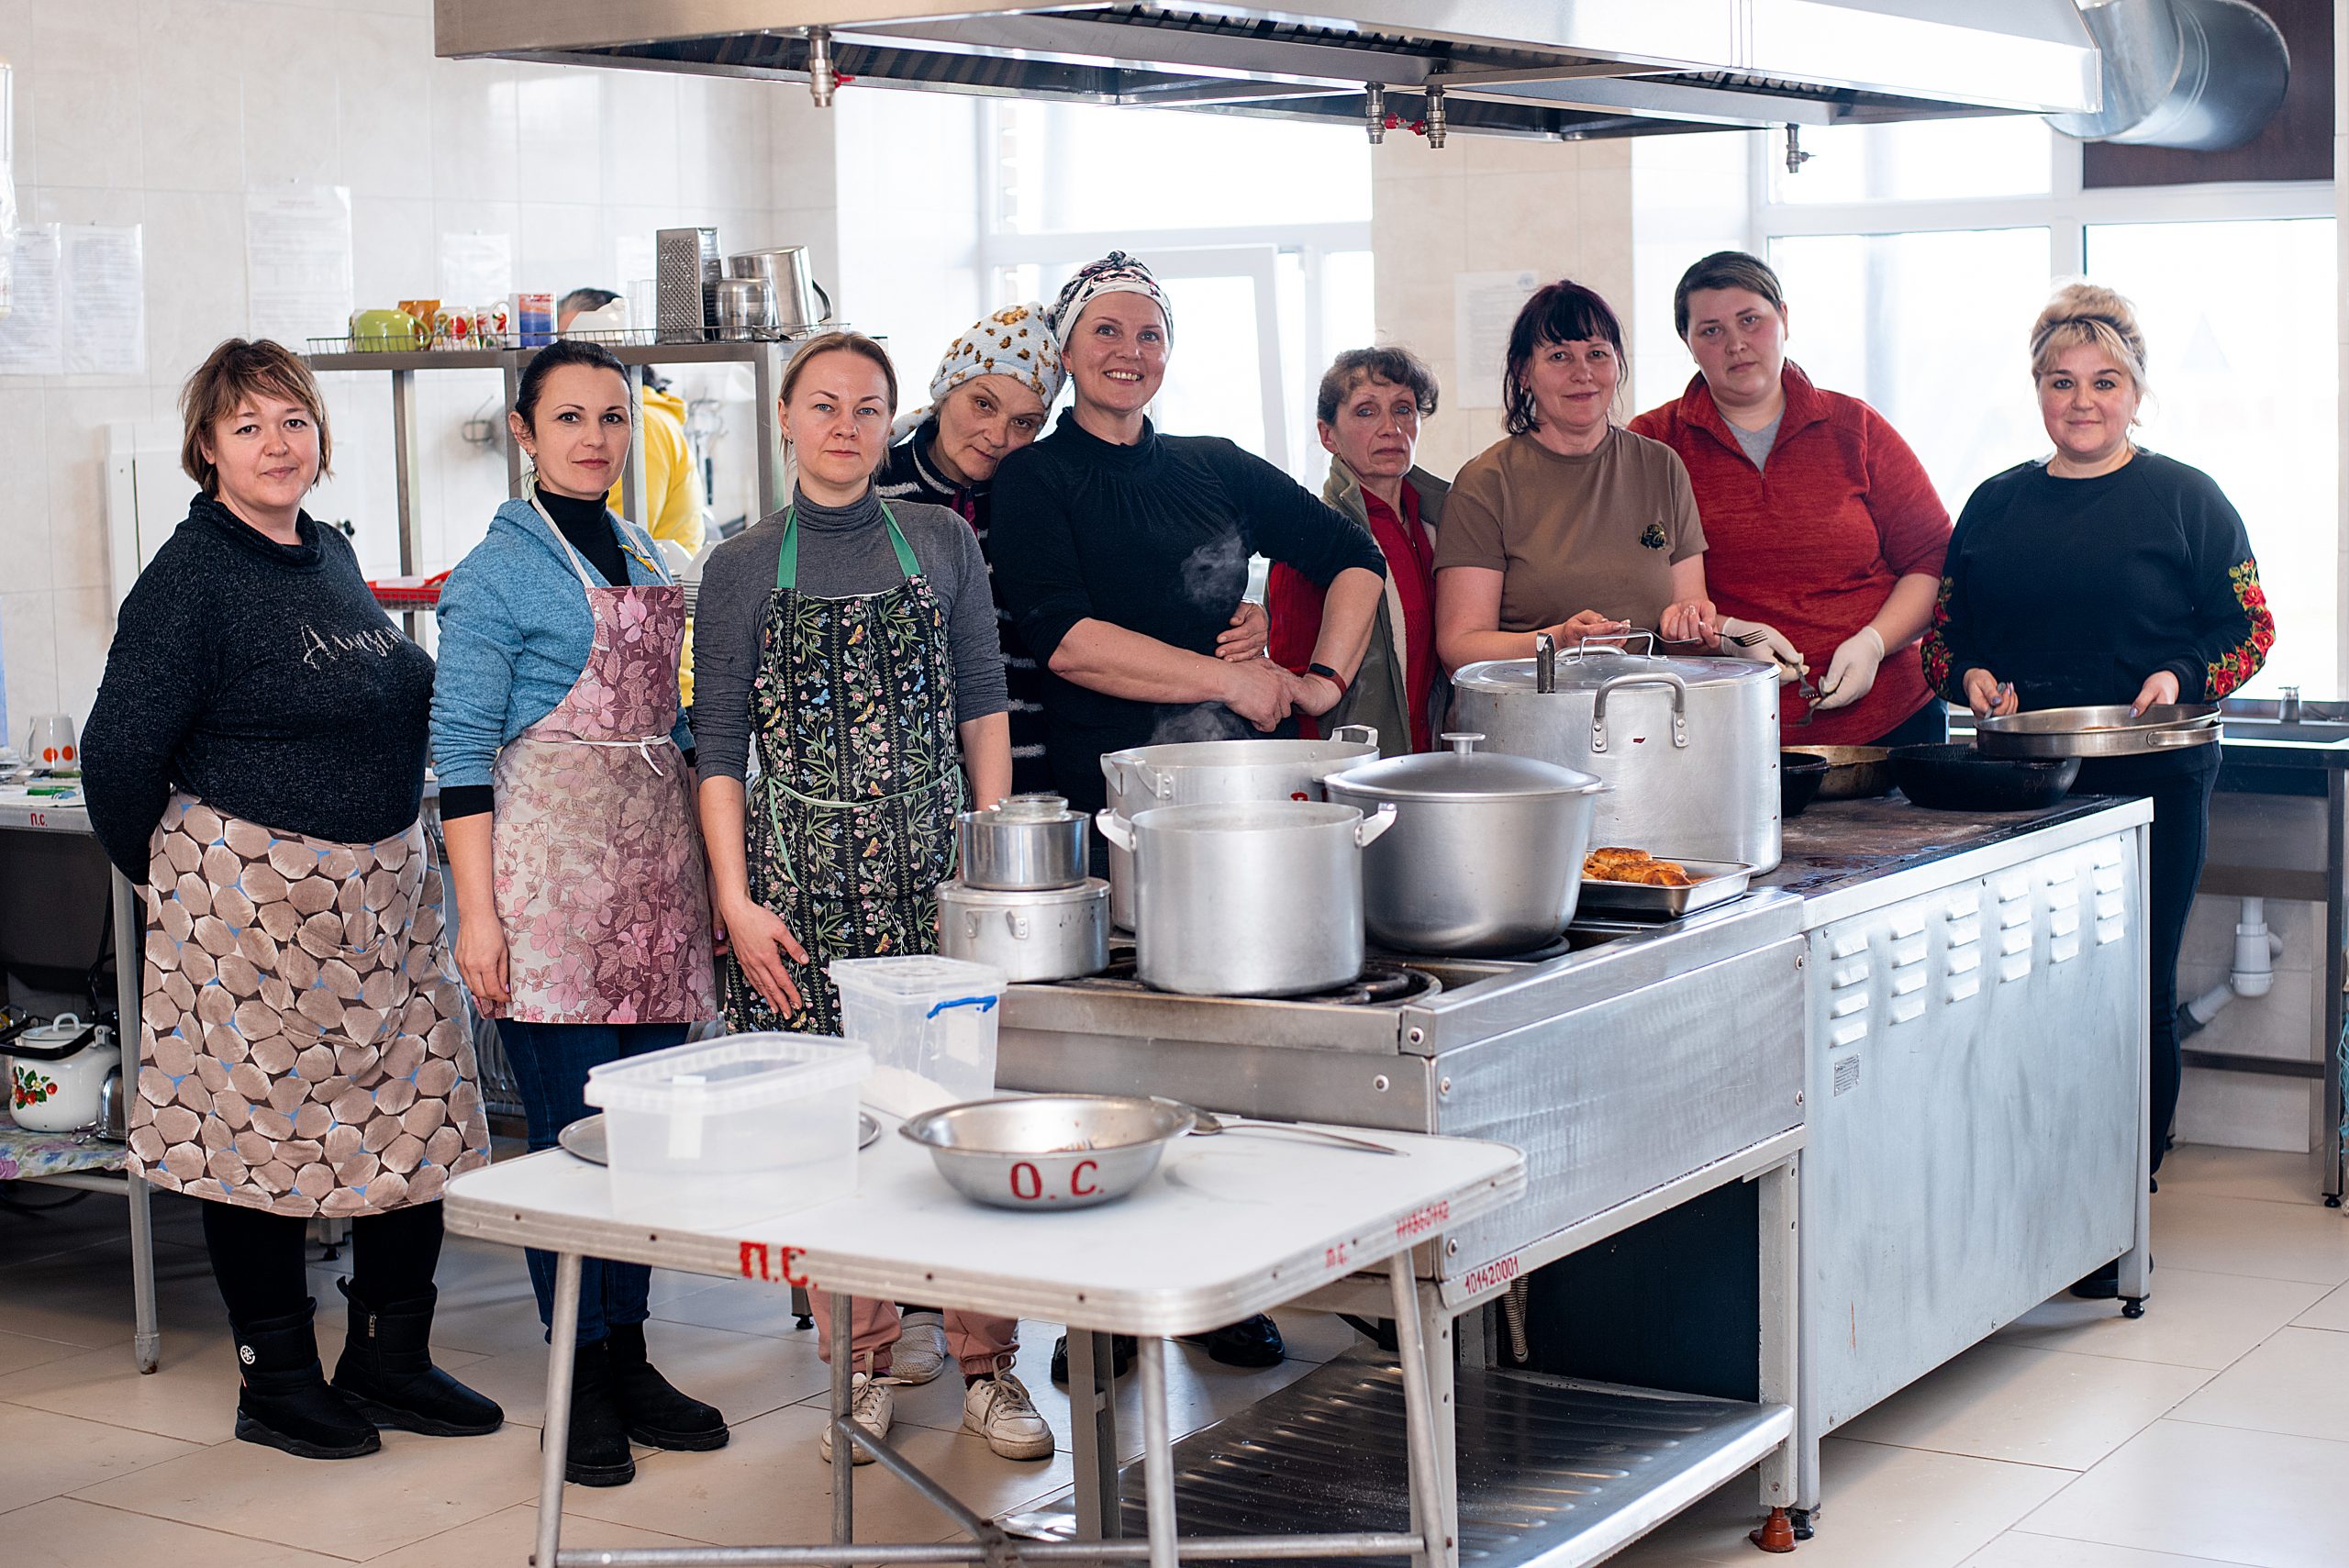 The team of teachers of the Mykolay-Pole school prepare food for the soldiers, March 2022, photo by Oleksandr Ivchyk